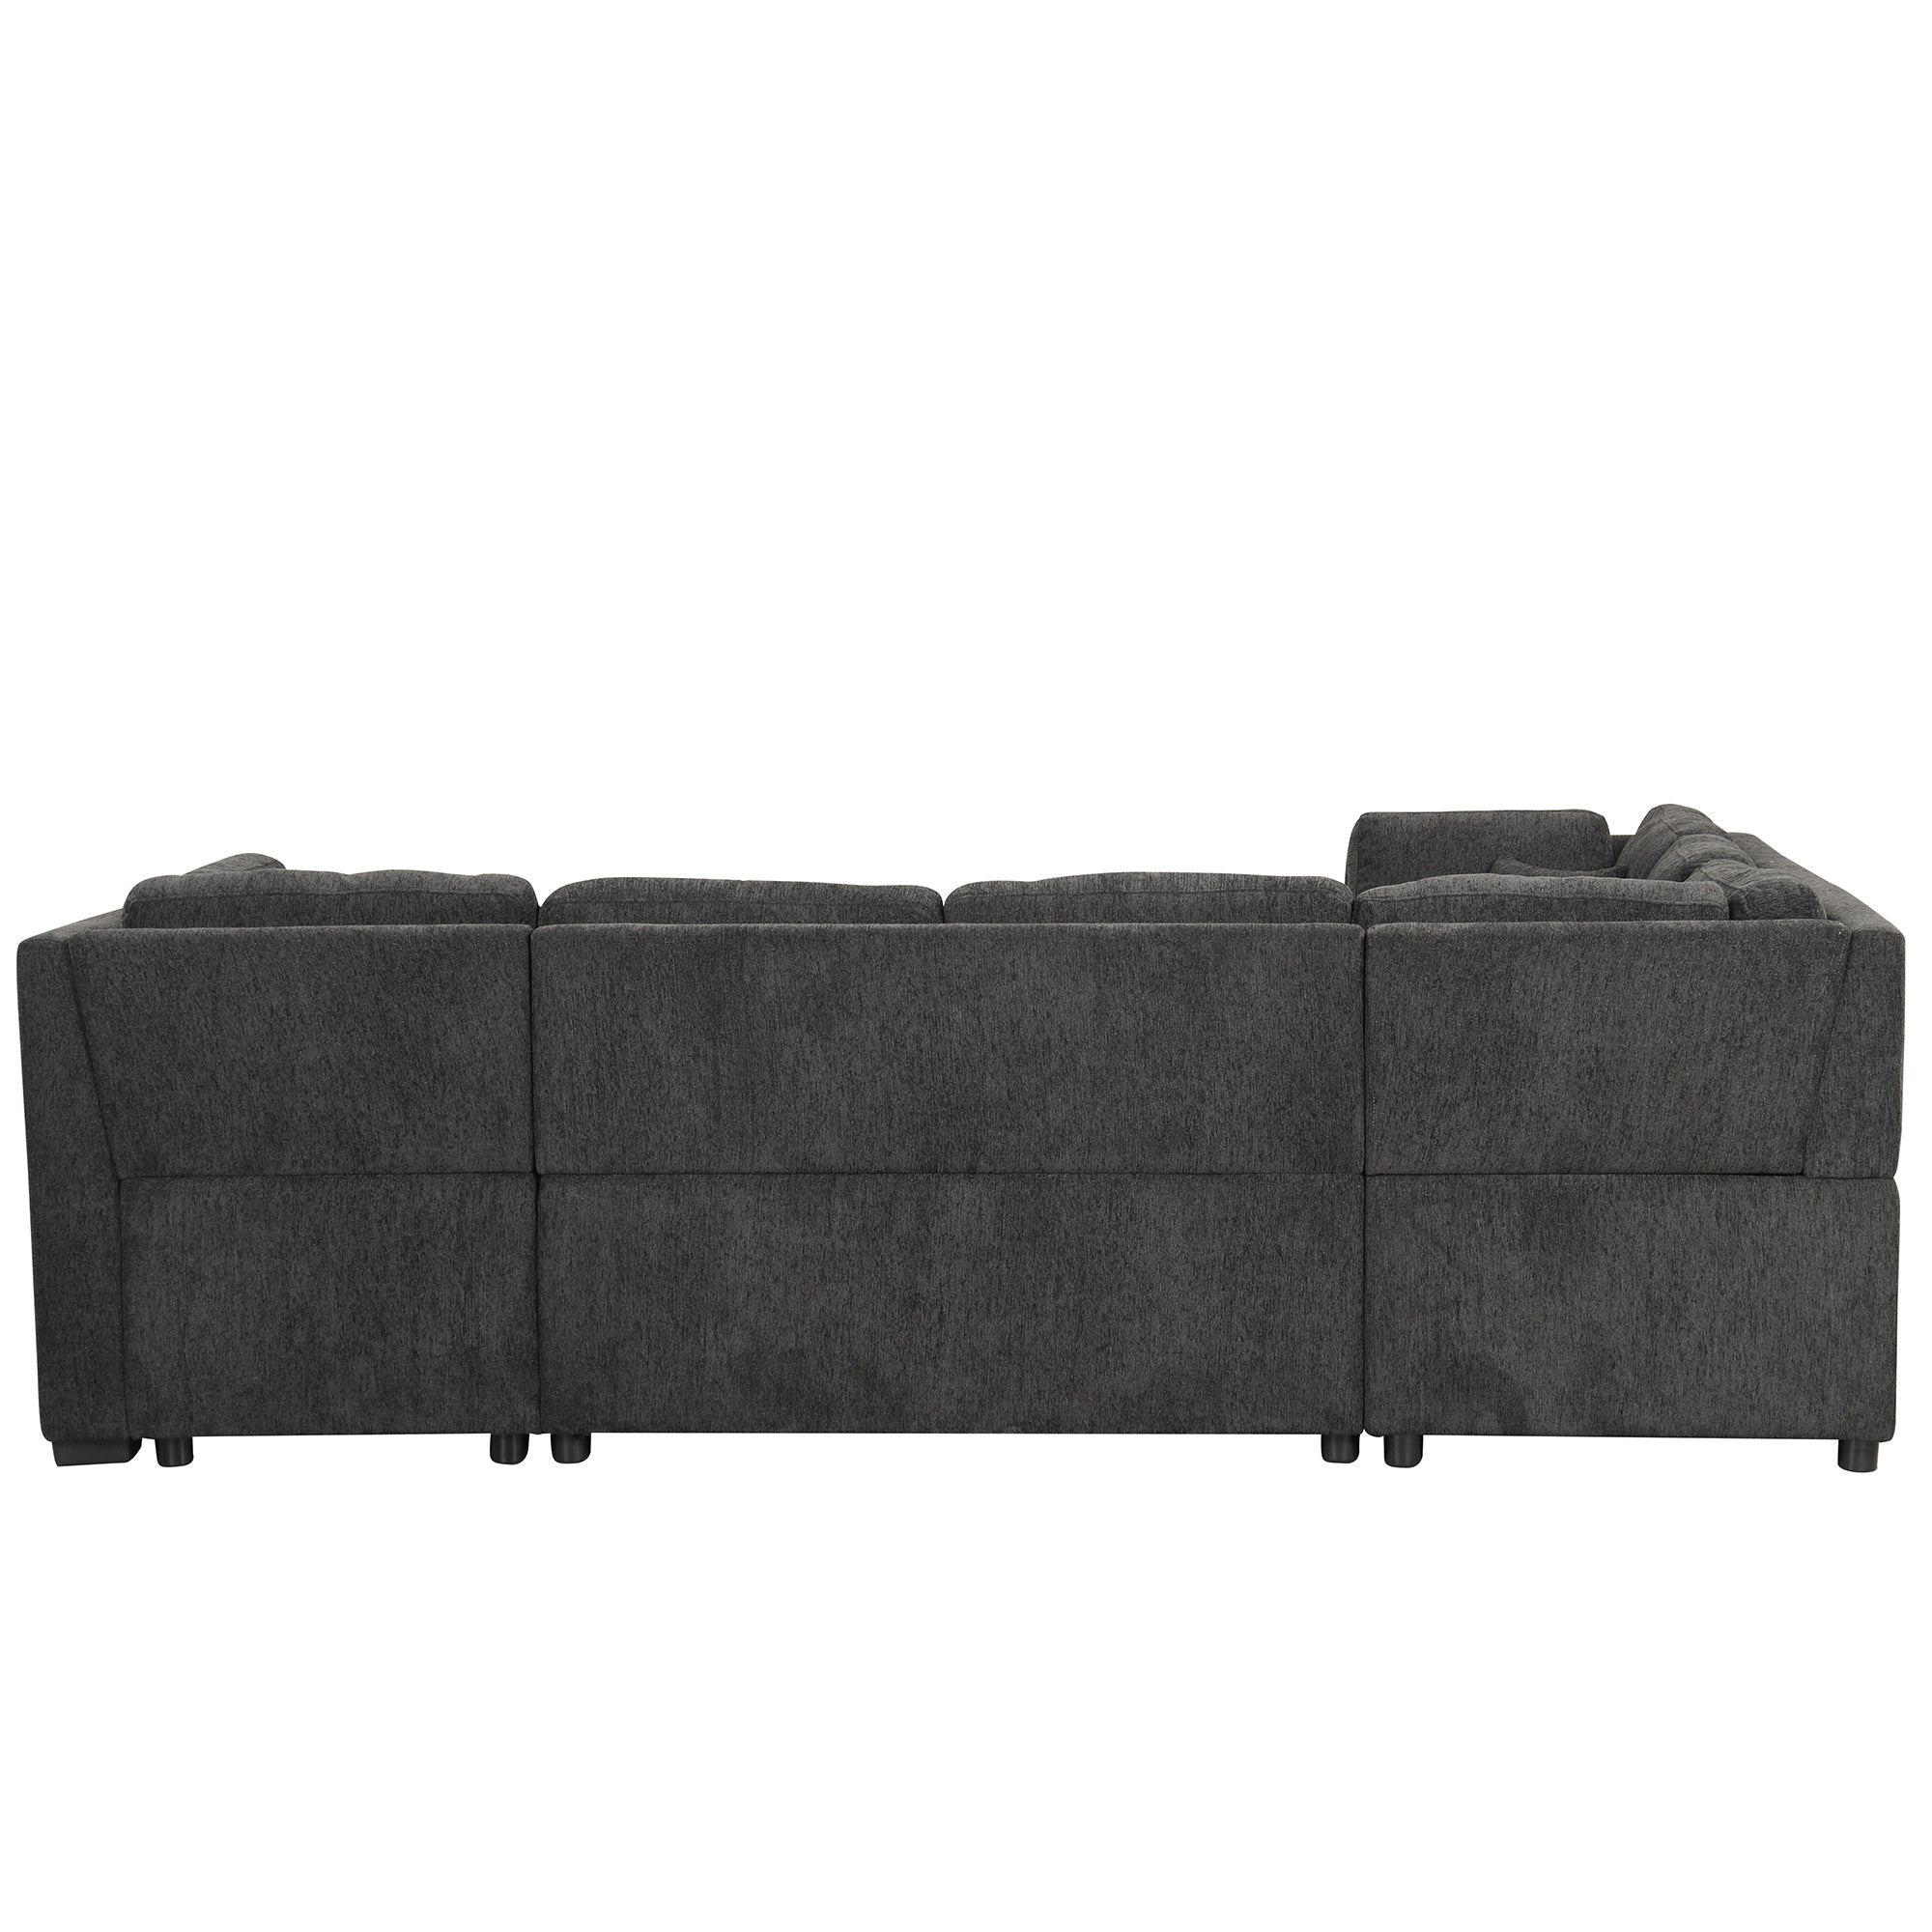 U-Shaped Sectional Sofa Bed w/Storage Chaise, USB & Power Outlets - Black-Stationary Sectionals-American Furniture Outlet